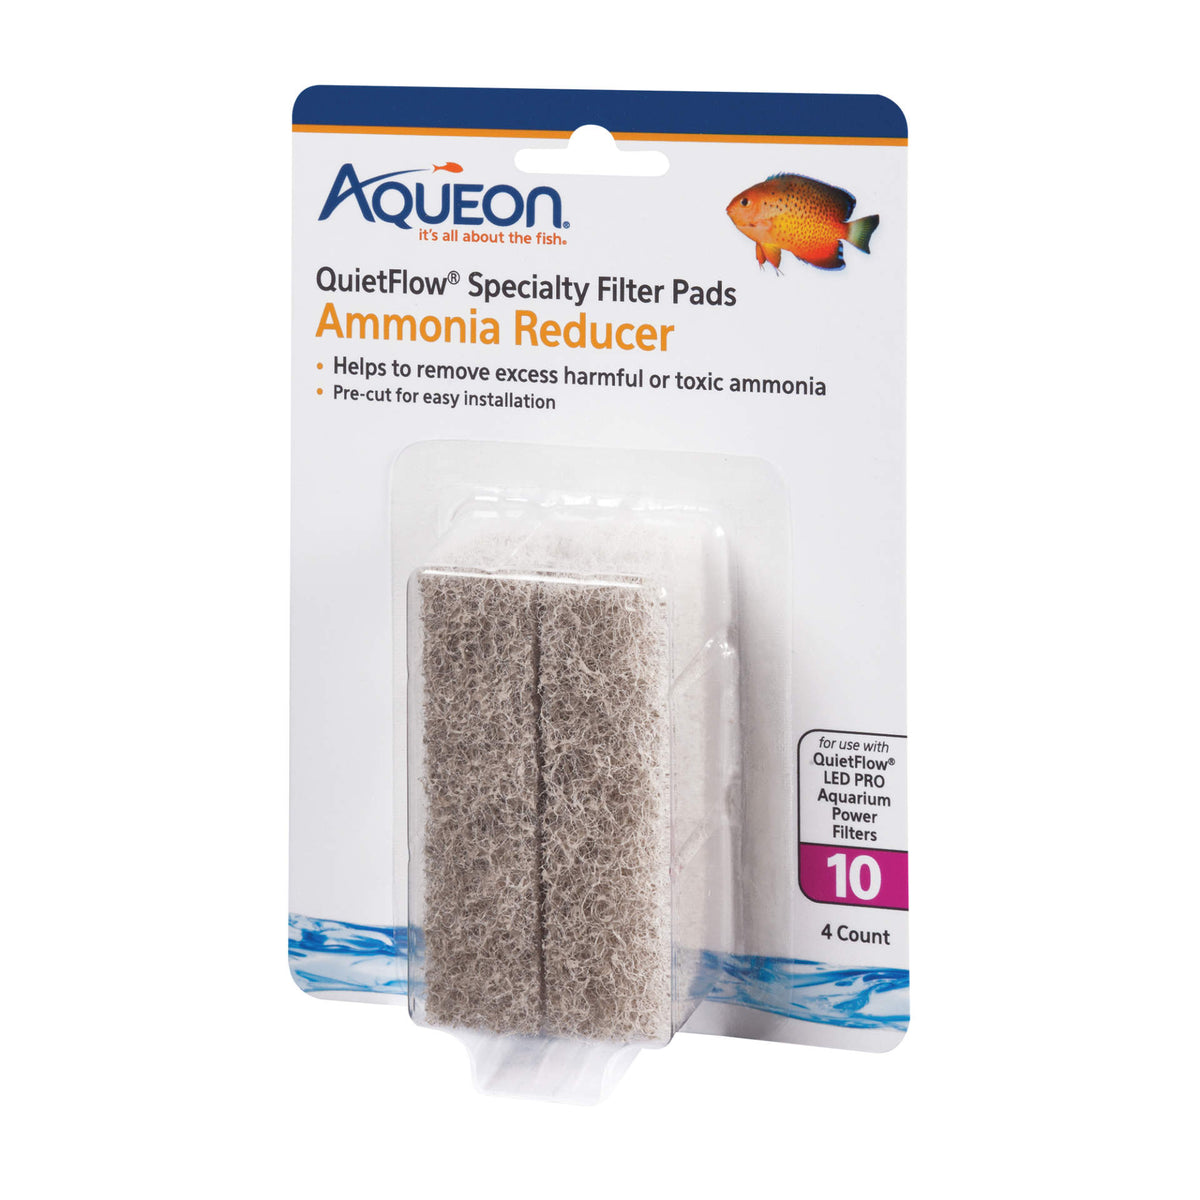 Aqueon - Replacement Specialty Filter Pads Ammonia Reducer